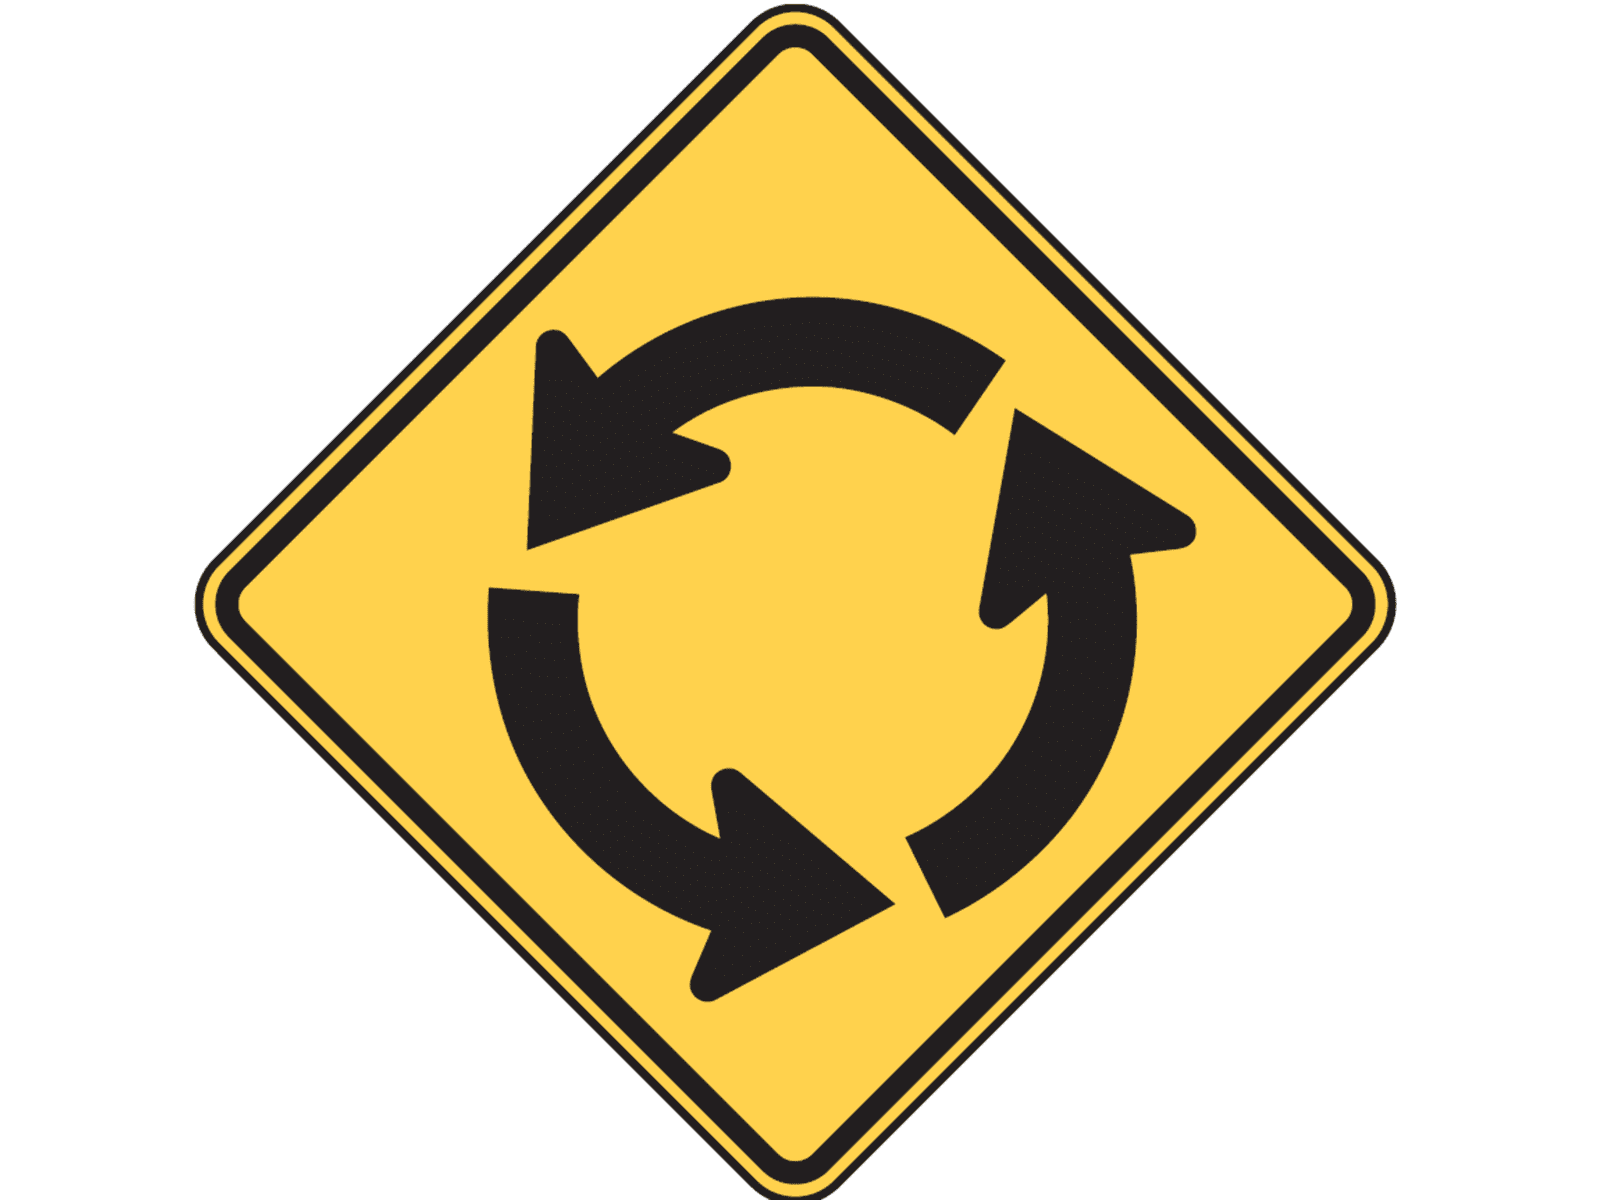 Roundabout W2-6 - W2: Intersections